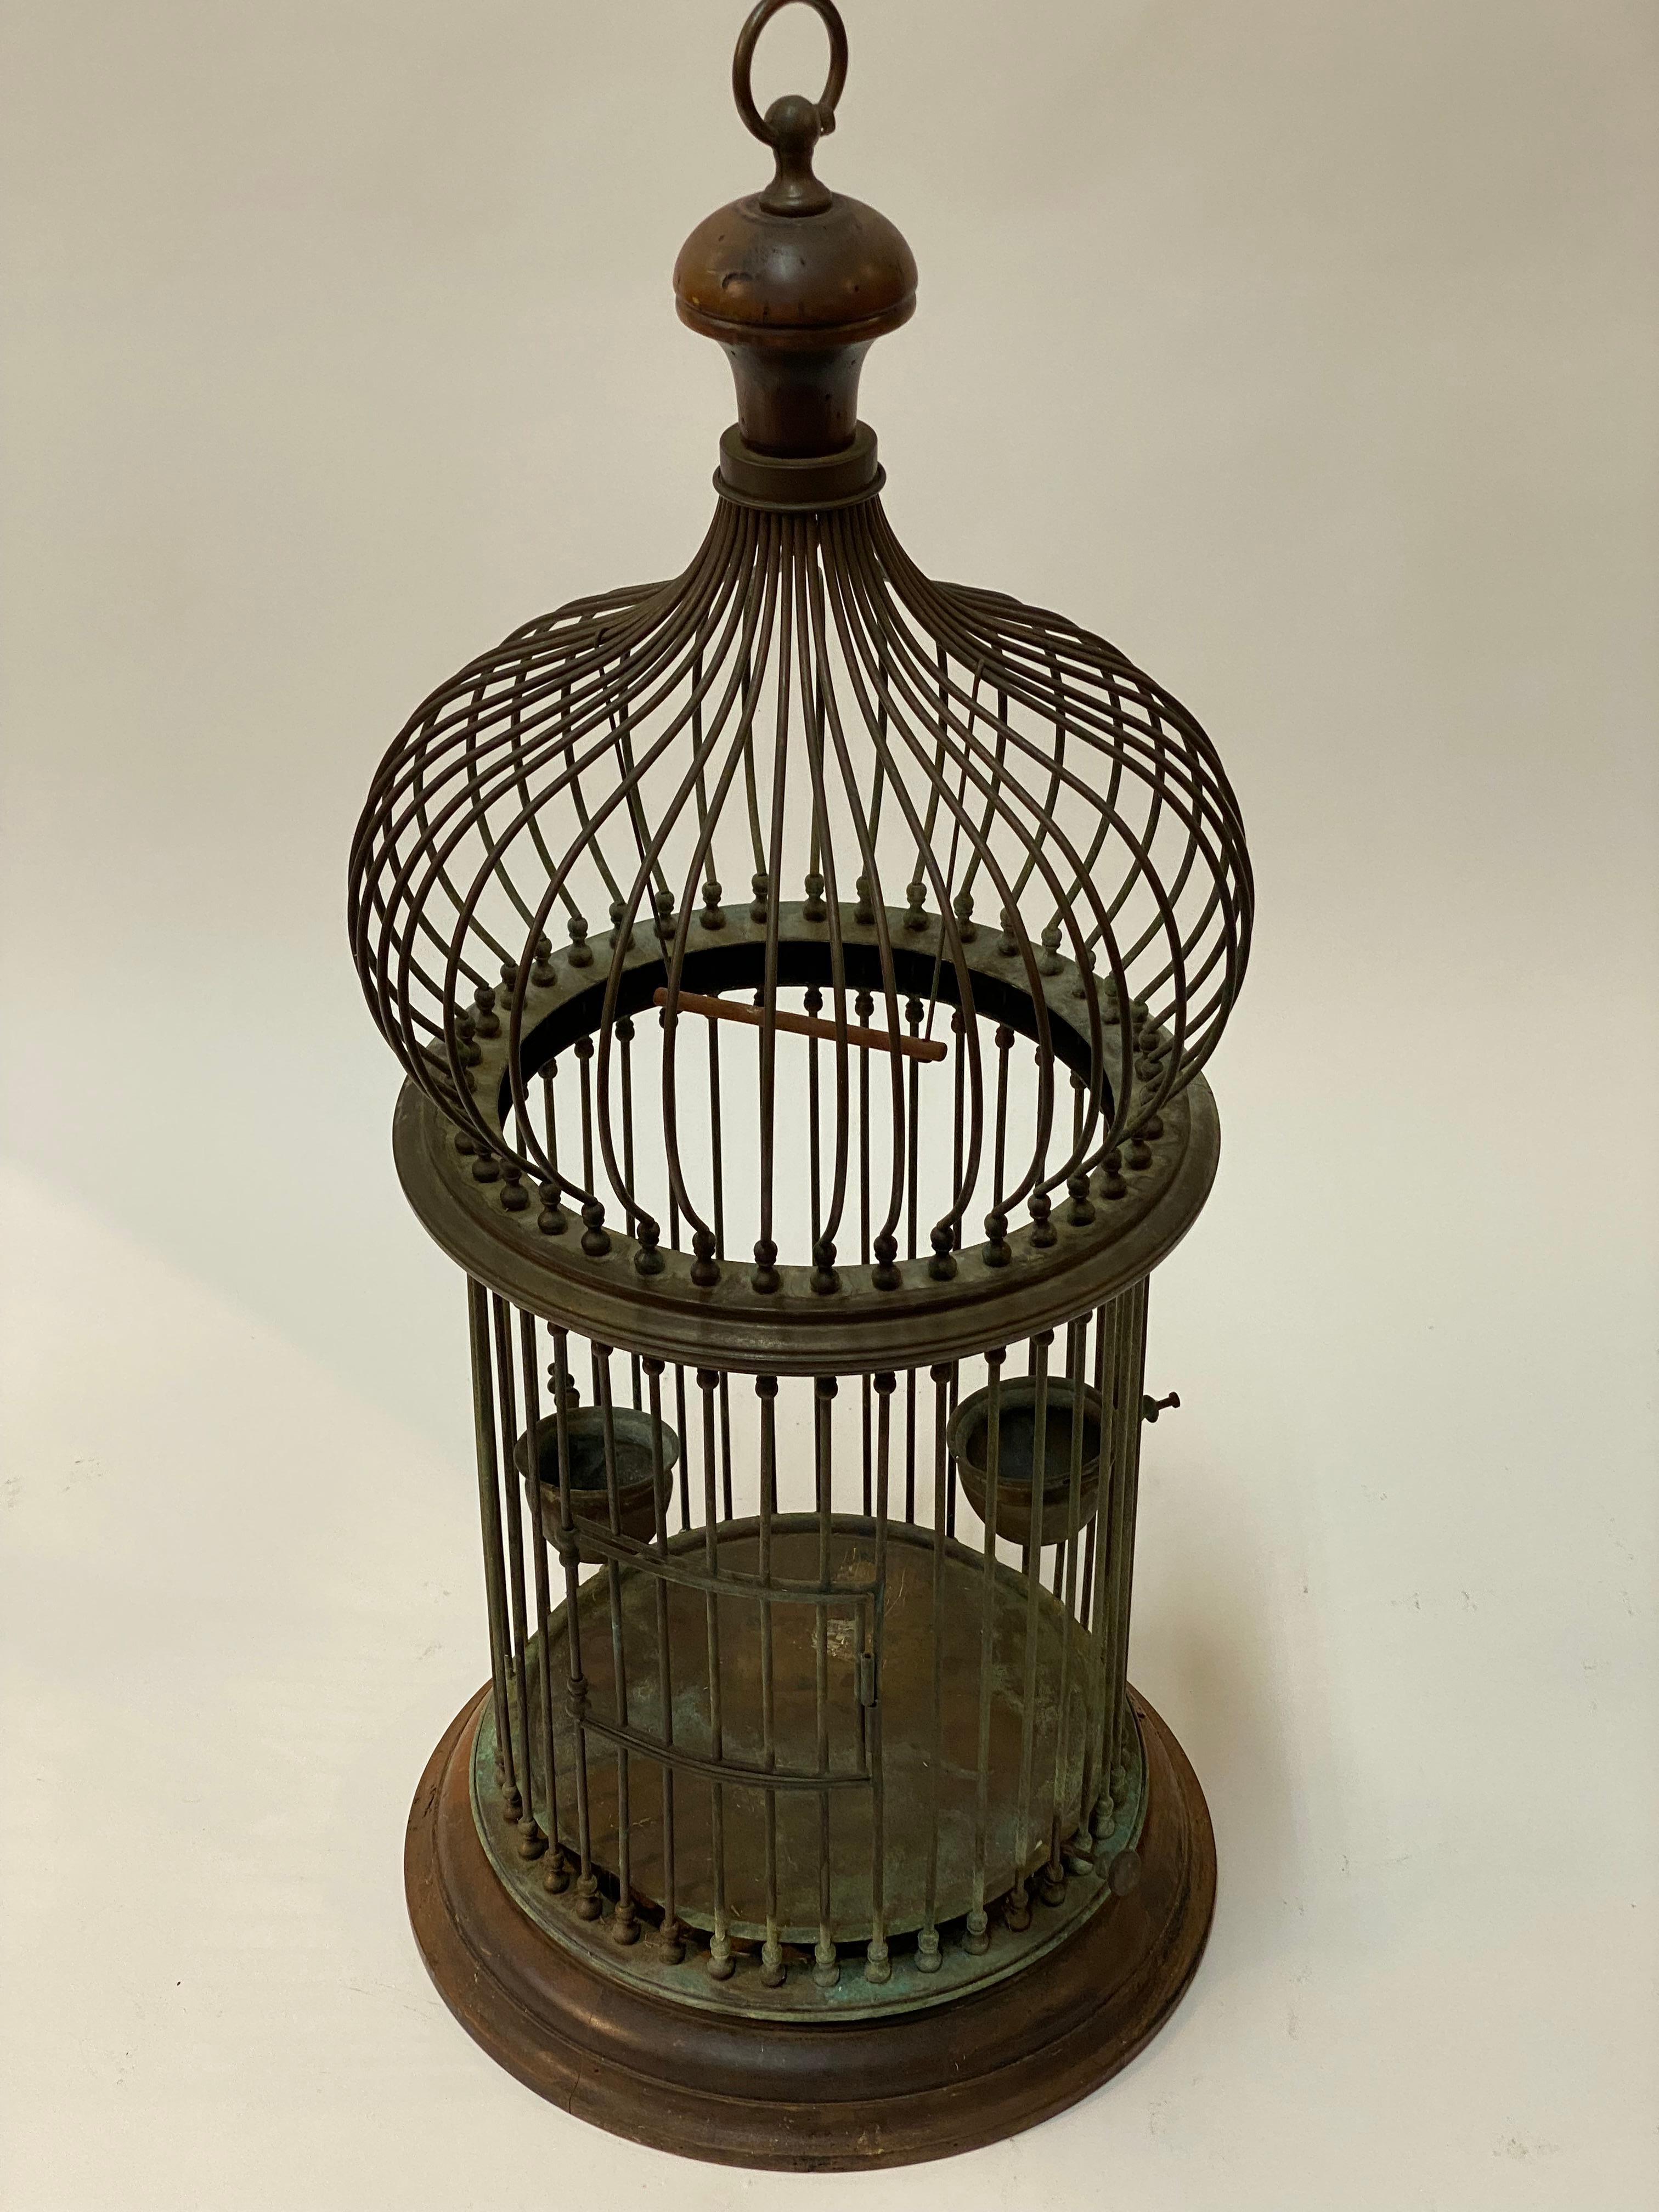 A very well made and constructed tubular copper rods and fruitwood onion dome Italian birdcage. Signed with a metal tag on the loop hanger, Italy. The cage includes a swing, two adjustable height cups for feed and water, an adjustable floor pan and